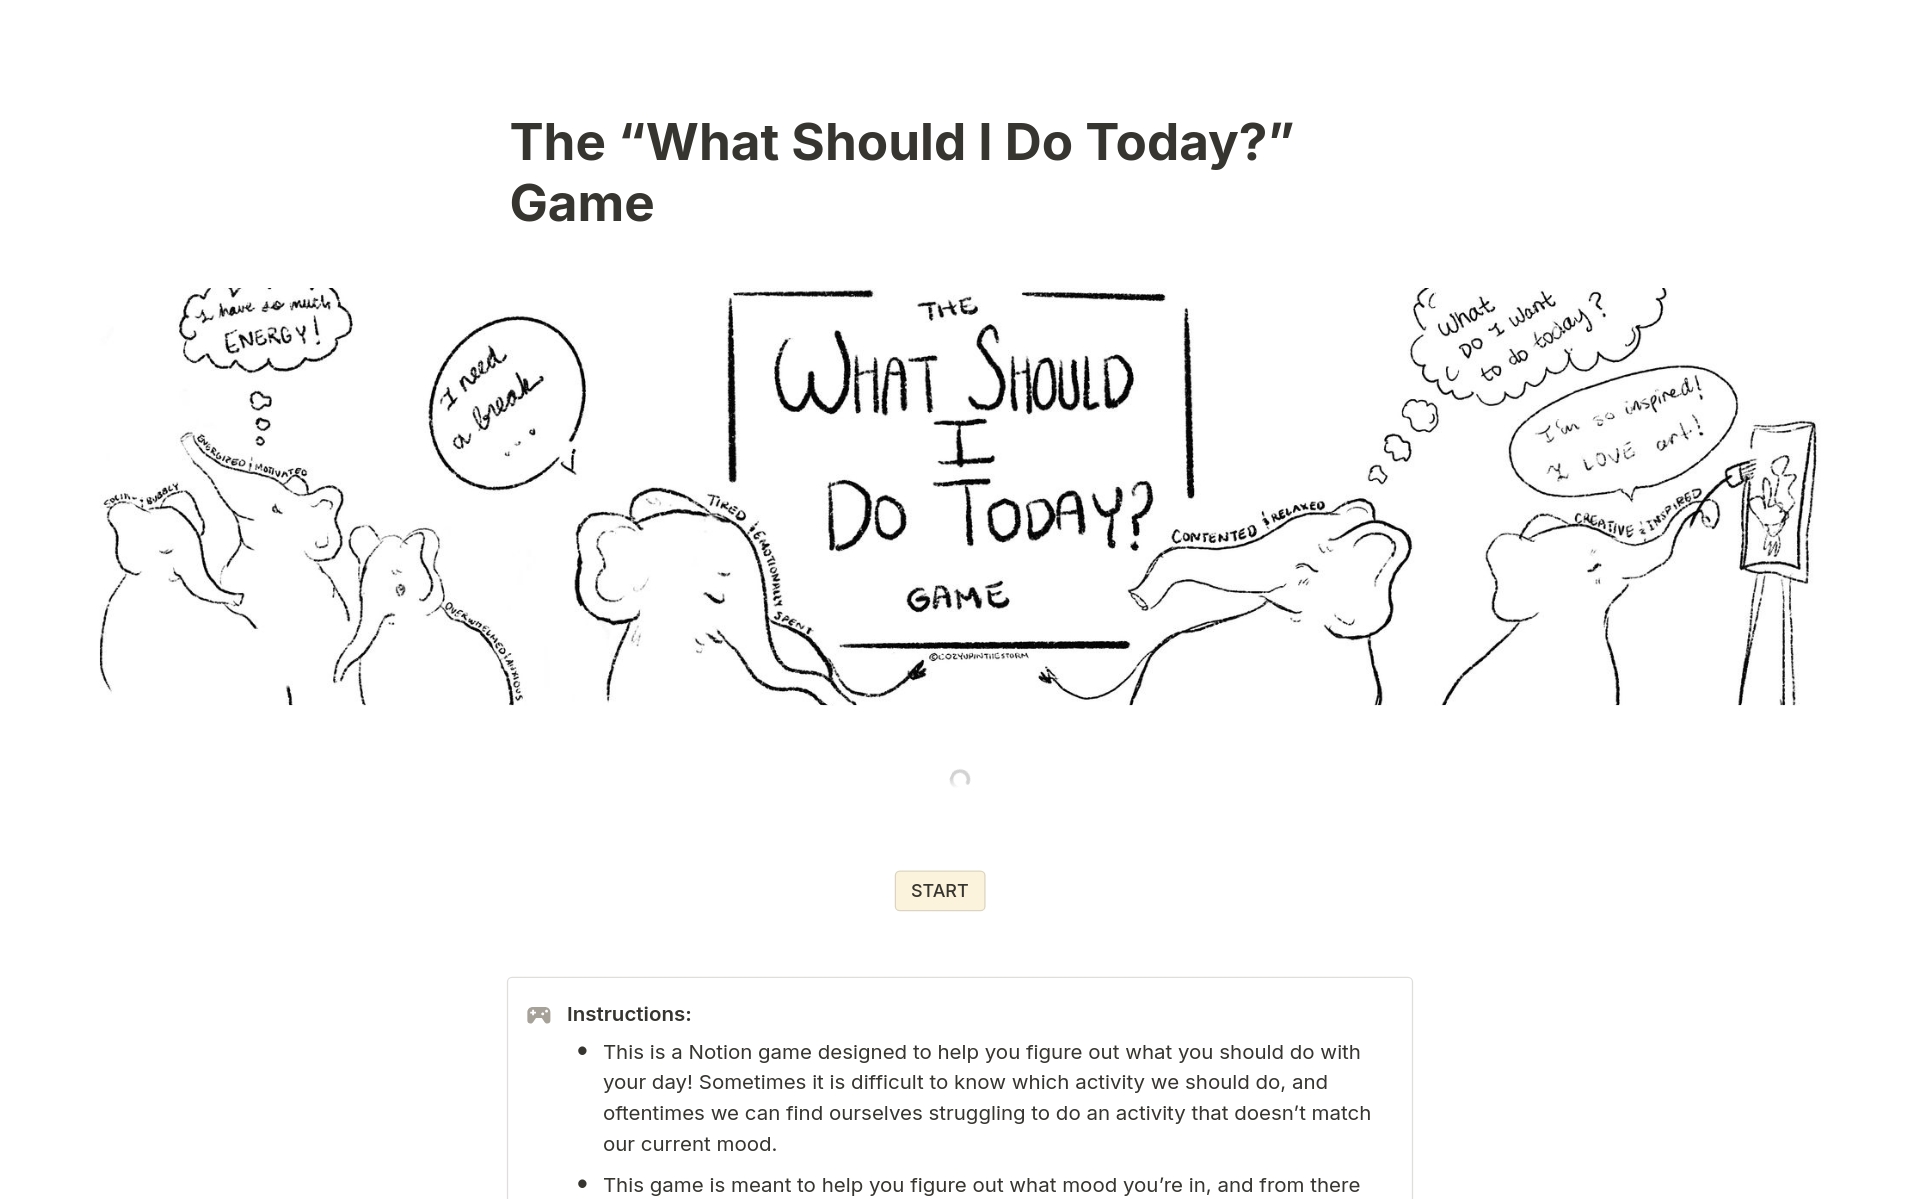 This is a Notion game designed to help you figure out what you should do with your day! With a choice based design, this template allows a player to navigate through this template by clicking buttons that most align with what activities they are interested in doing.